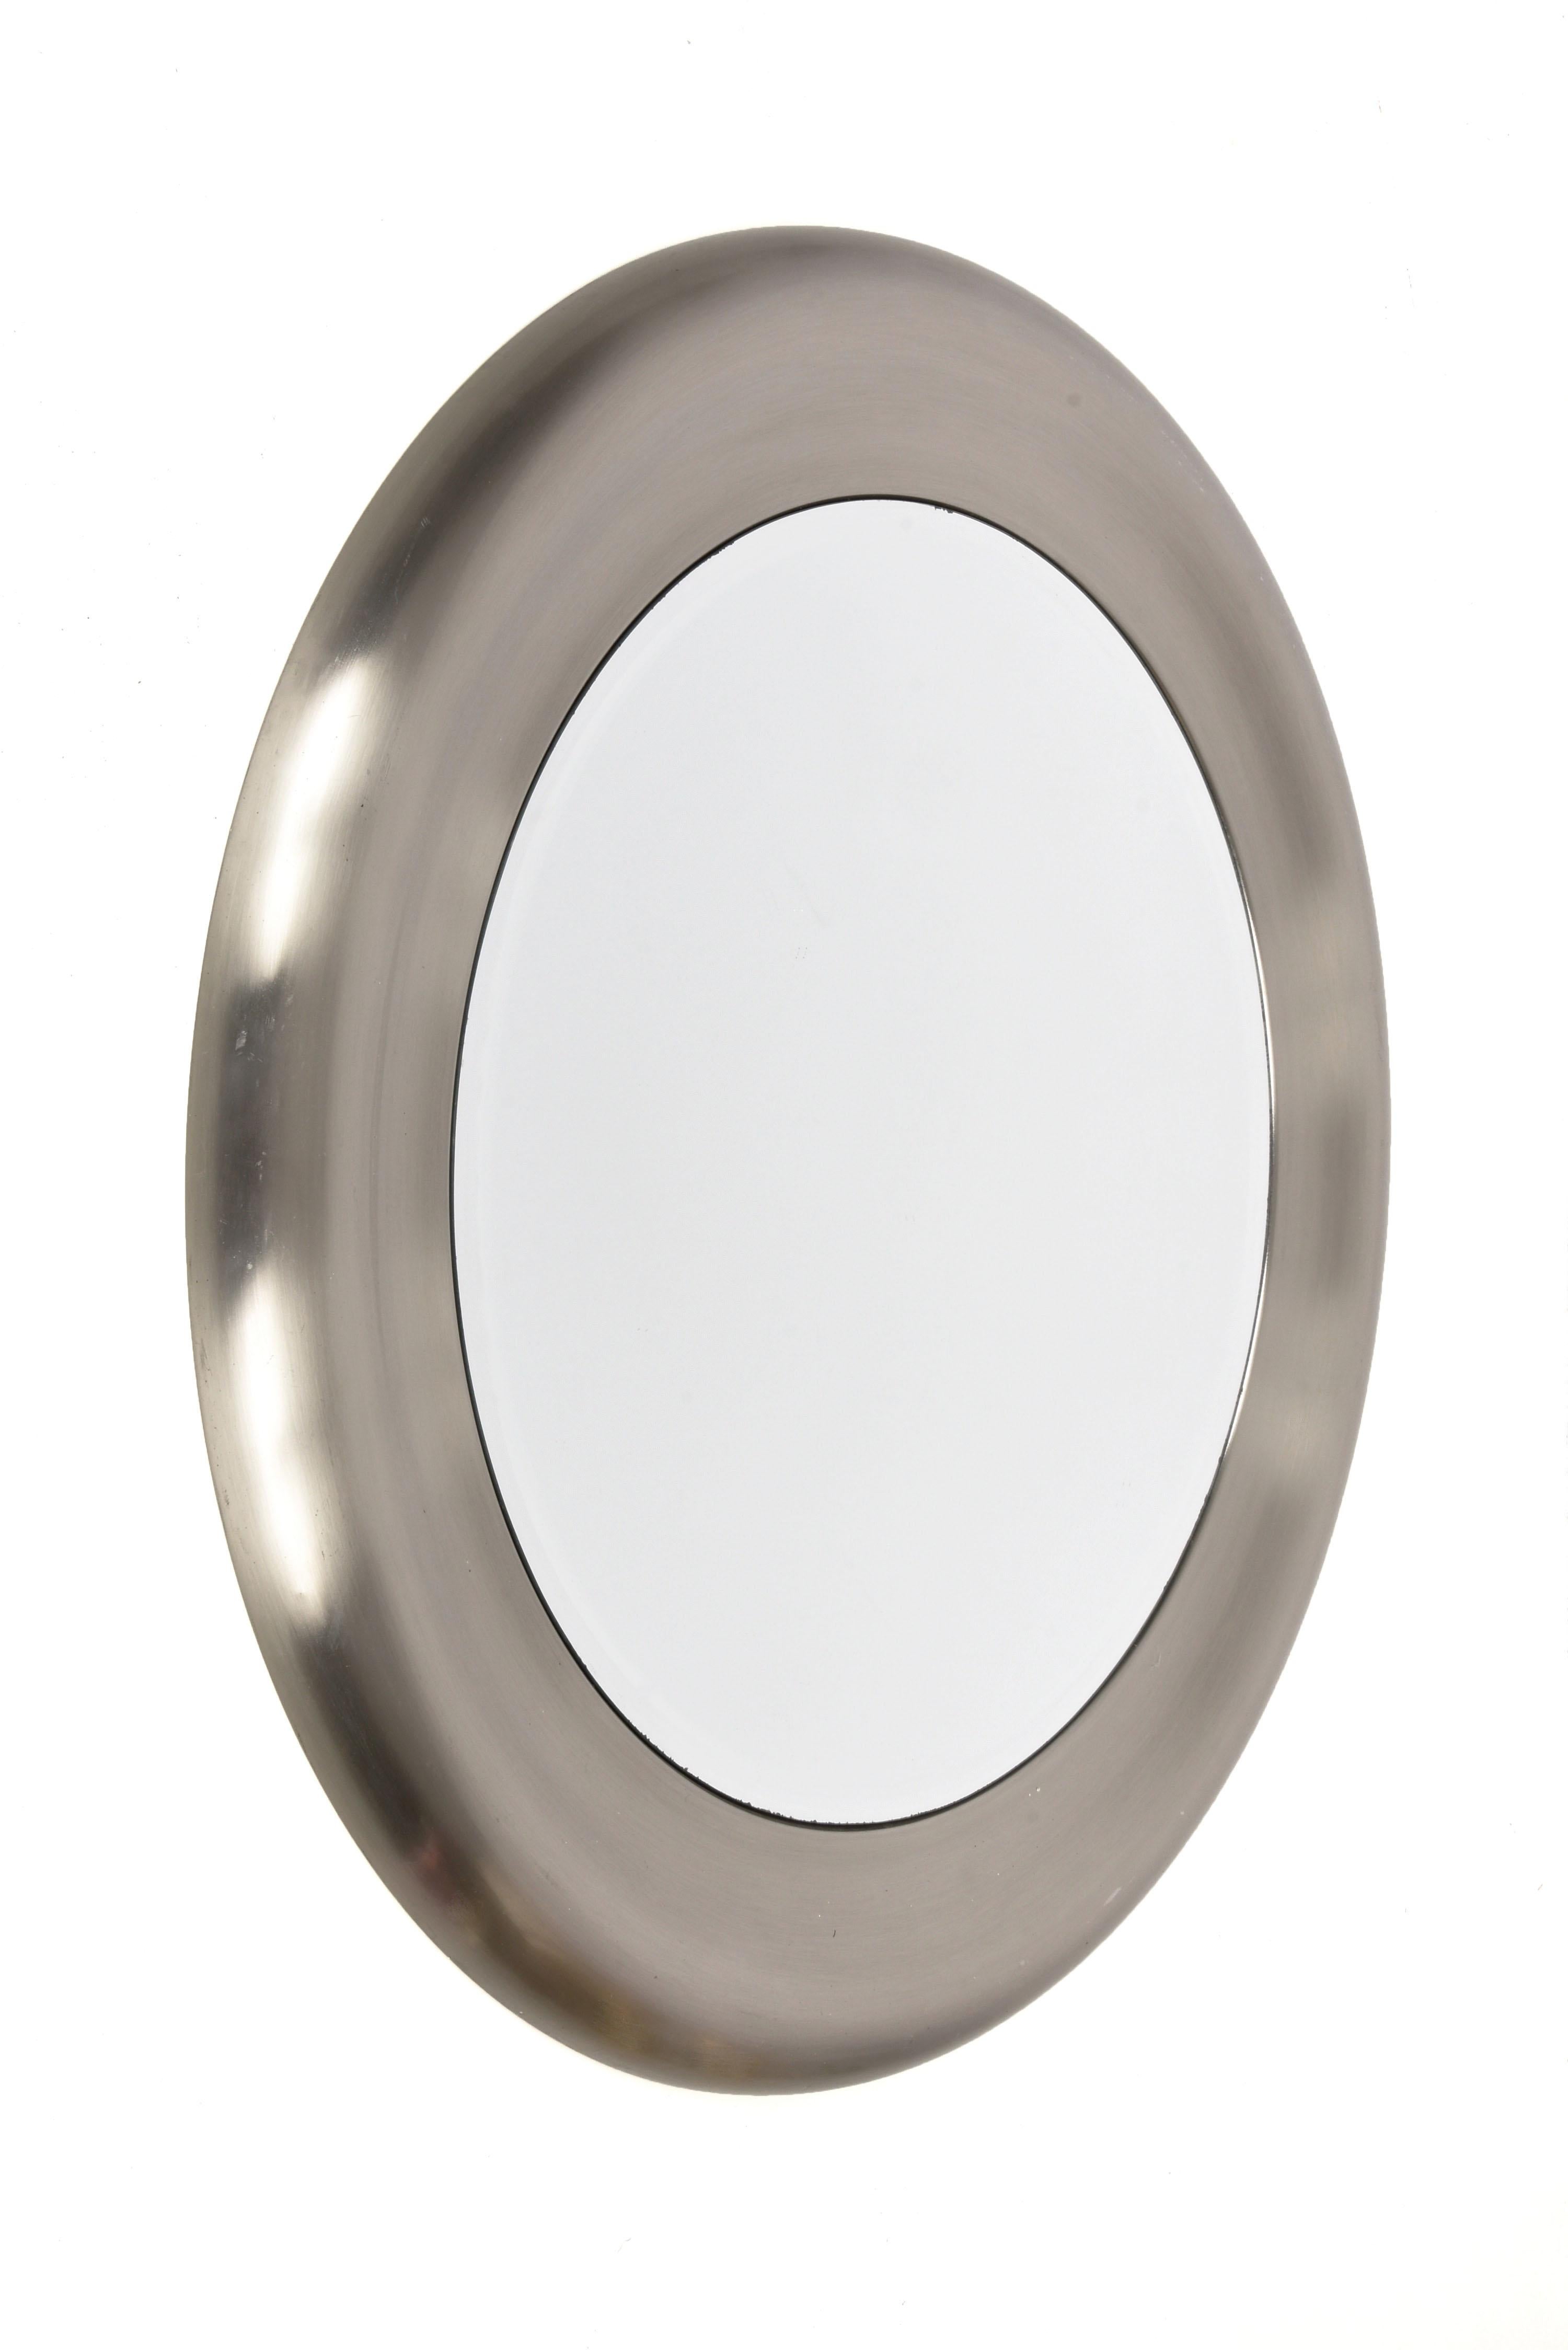 Midcentury Reggiani Italian Round Steel and Bevelled Wall Mirror, 1960s For Sale 10